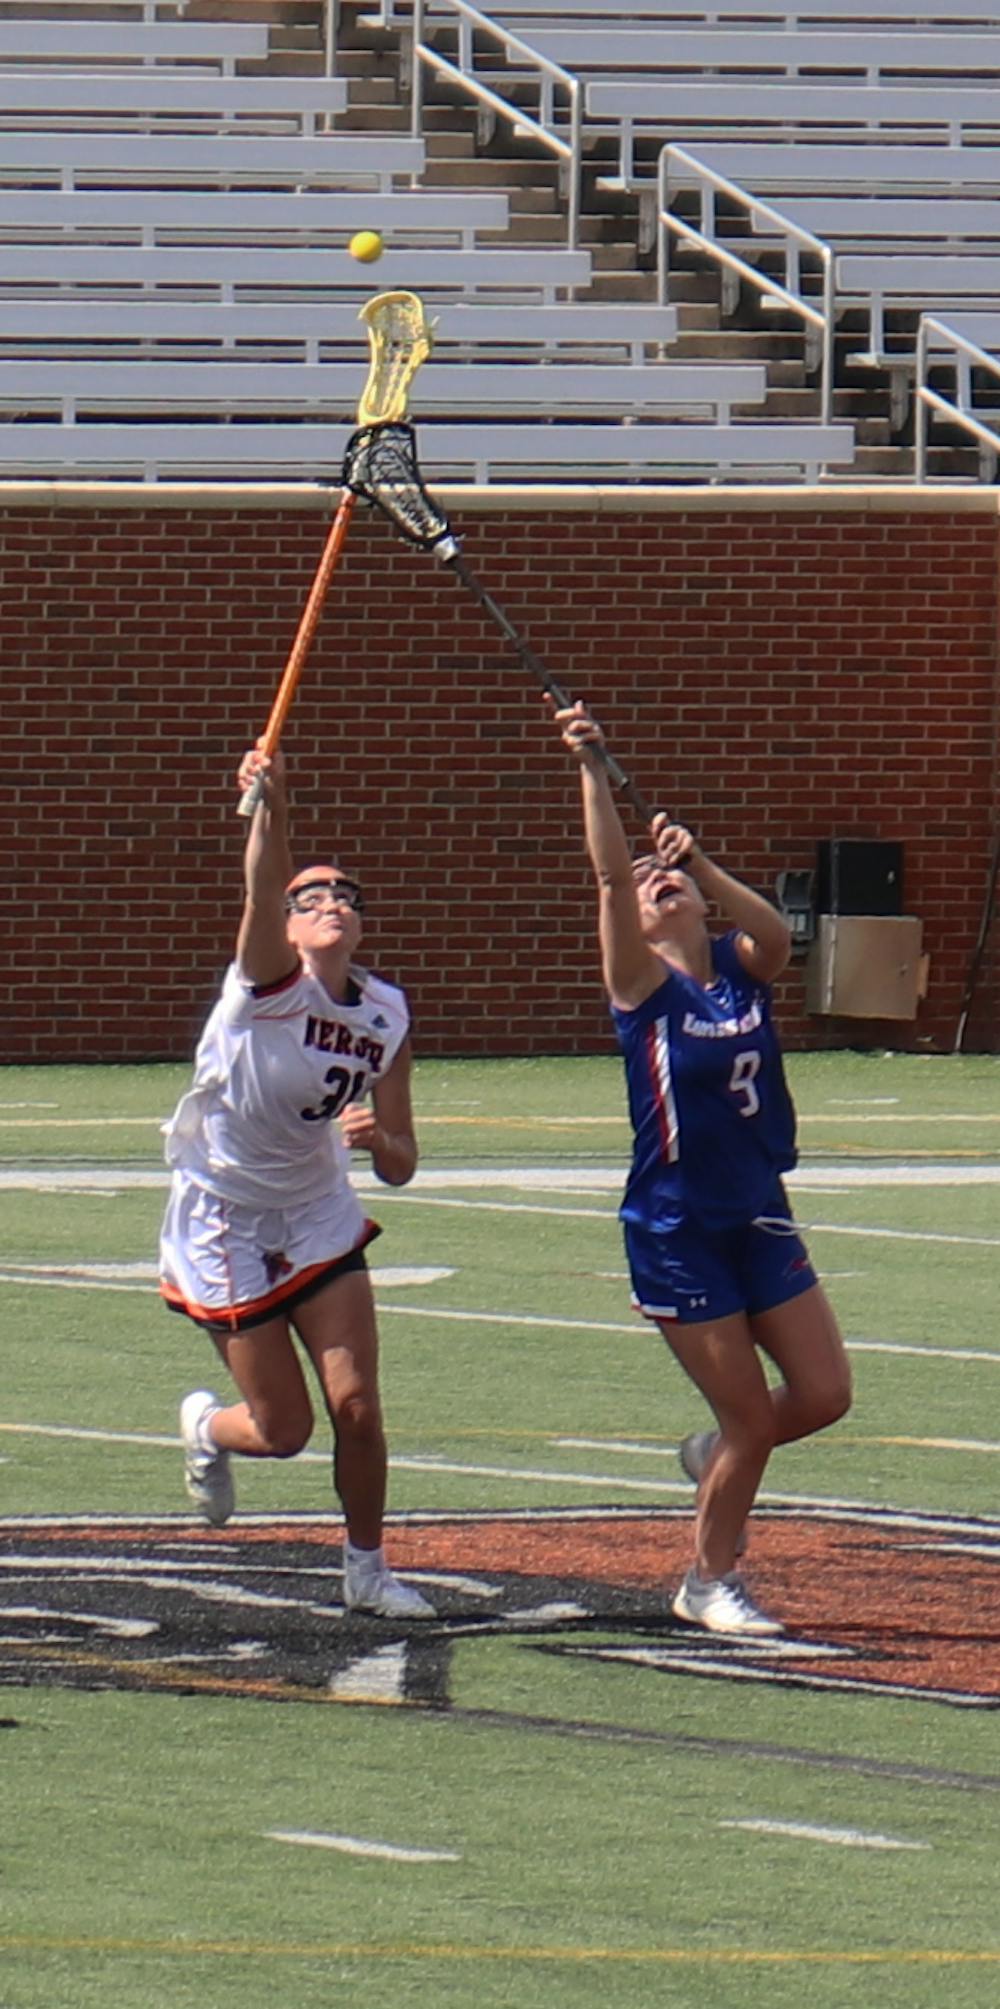 <p>Mercer player Erin Degnan (#31) fighting for the ball in their game against the UMASS Lowell on March 6. (Photo by Noah Grant)</p>